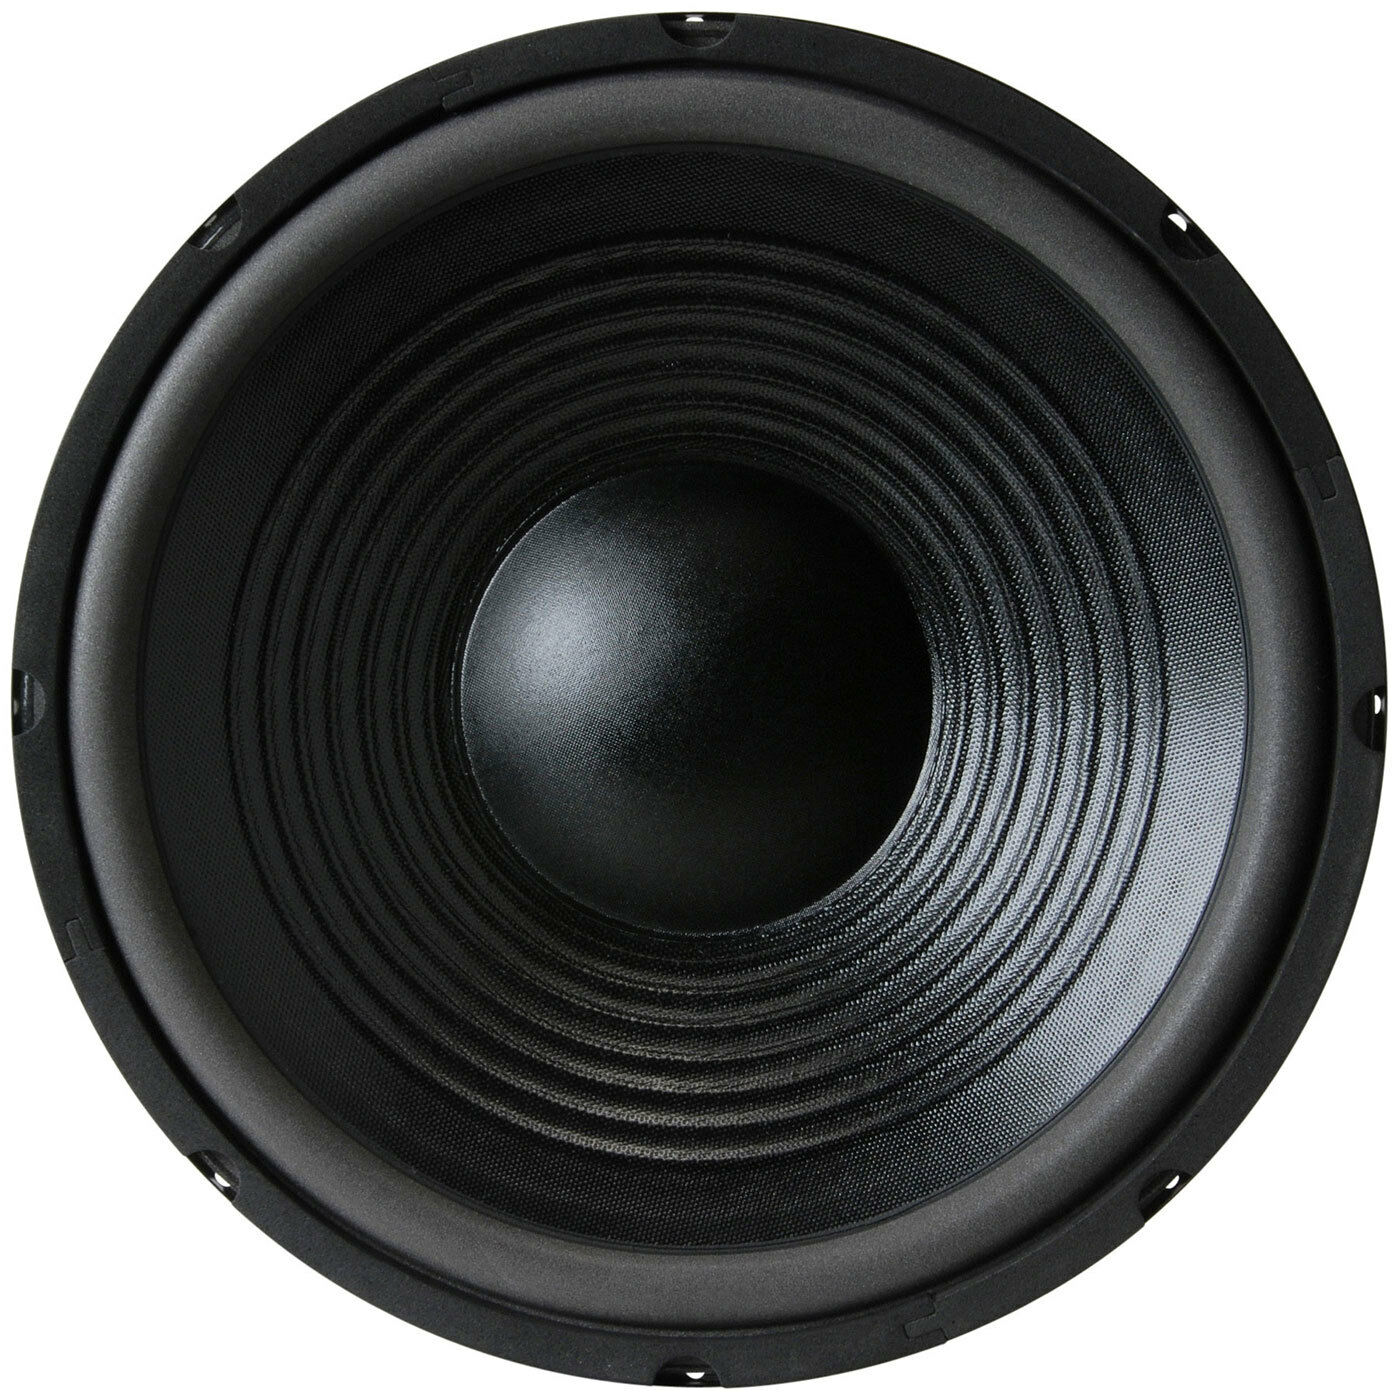 New 12" Woofer Speaker.bass Driver.home Audio 8 Ohm.replacement Subwoofer.twelve